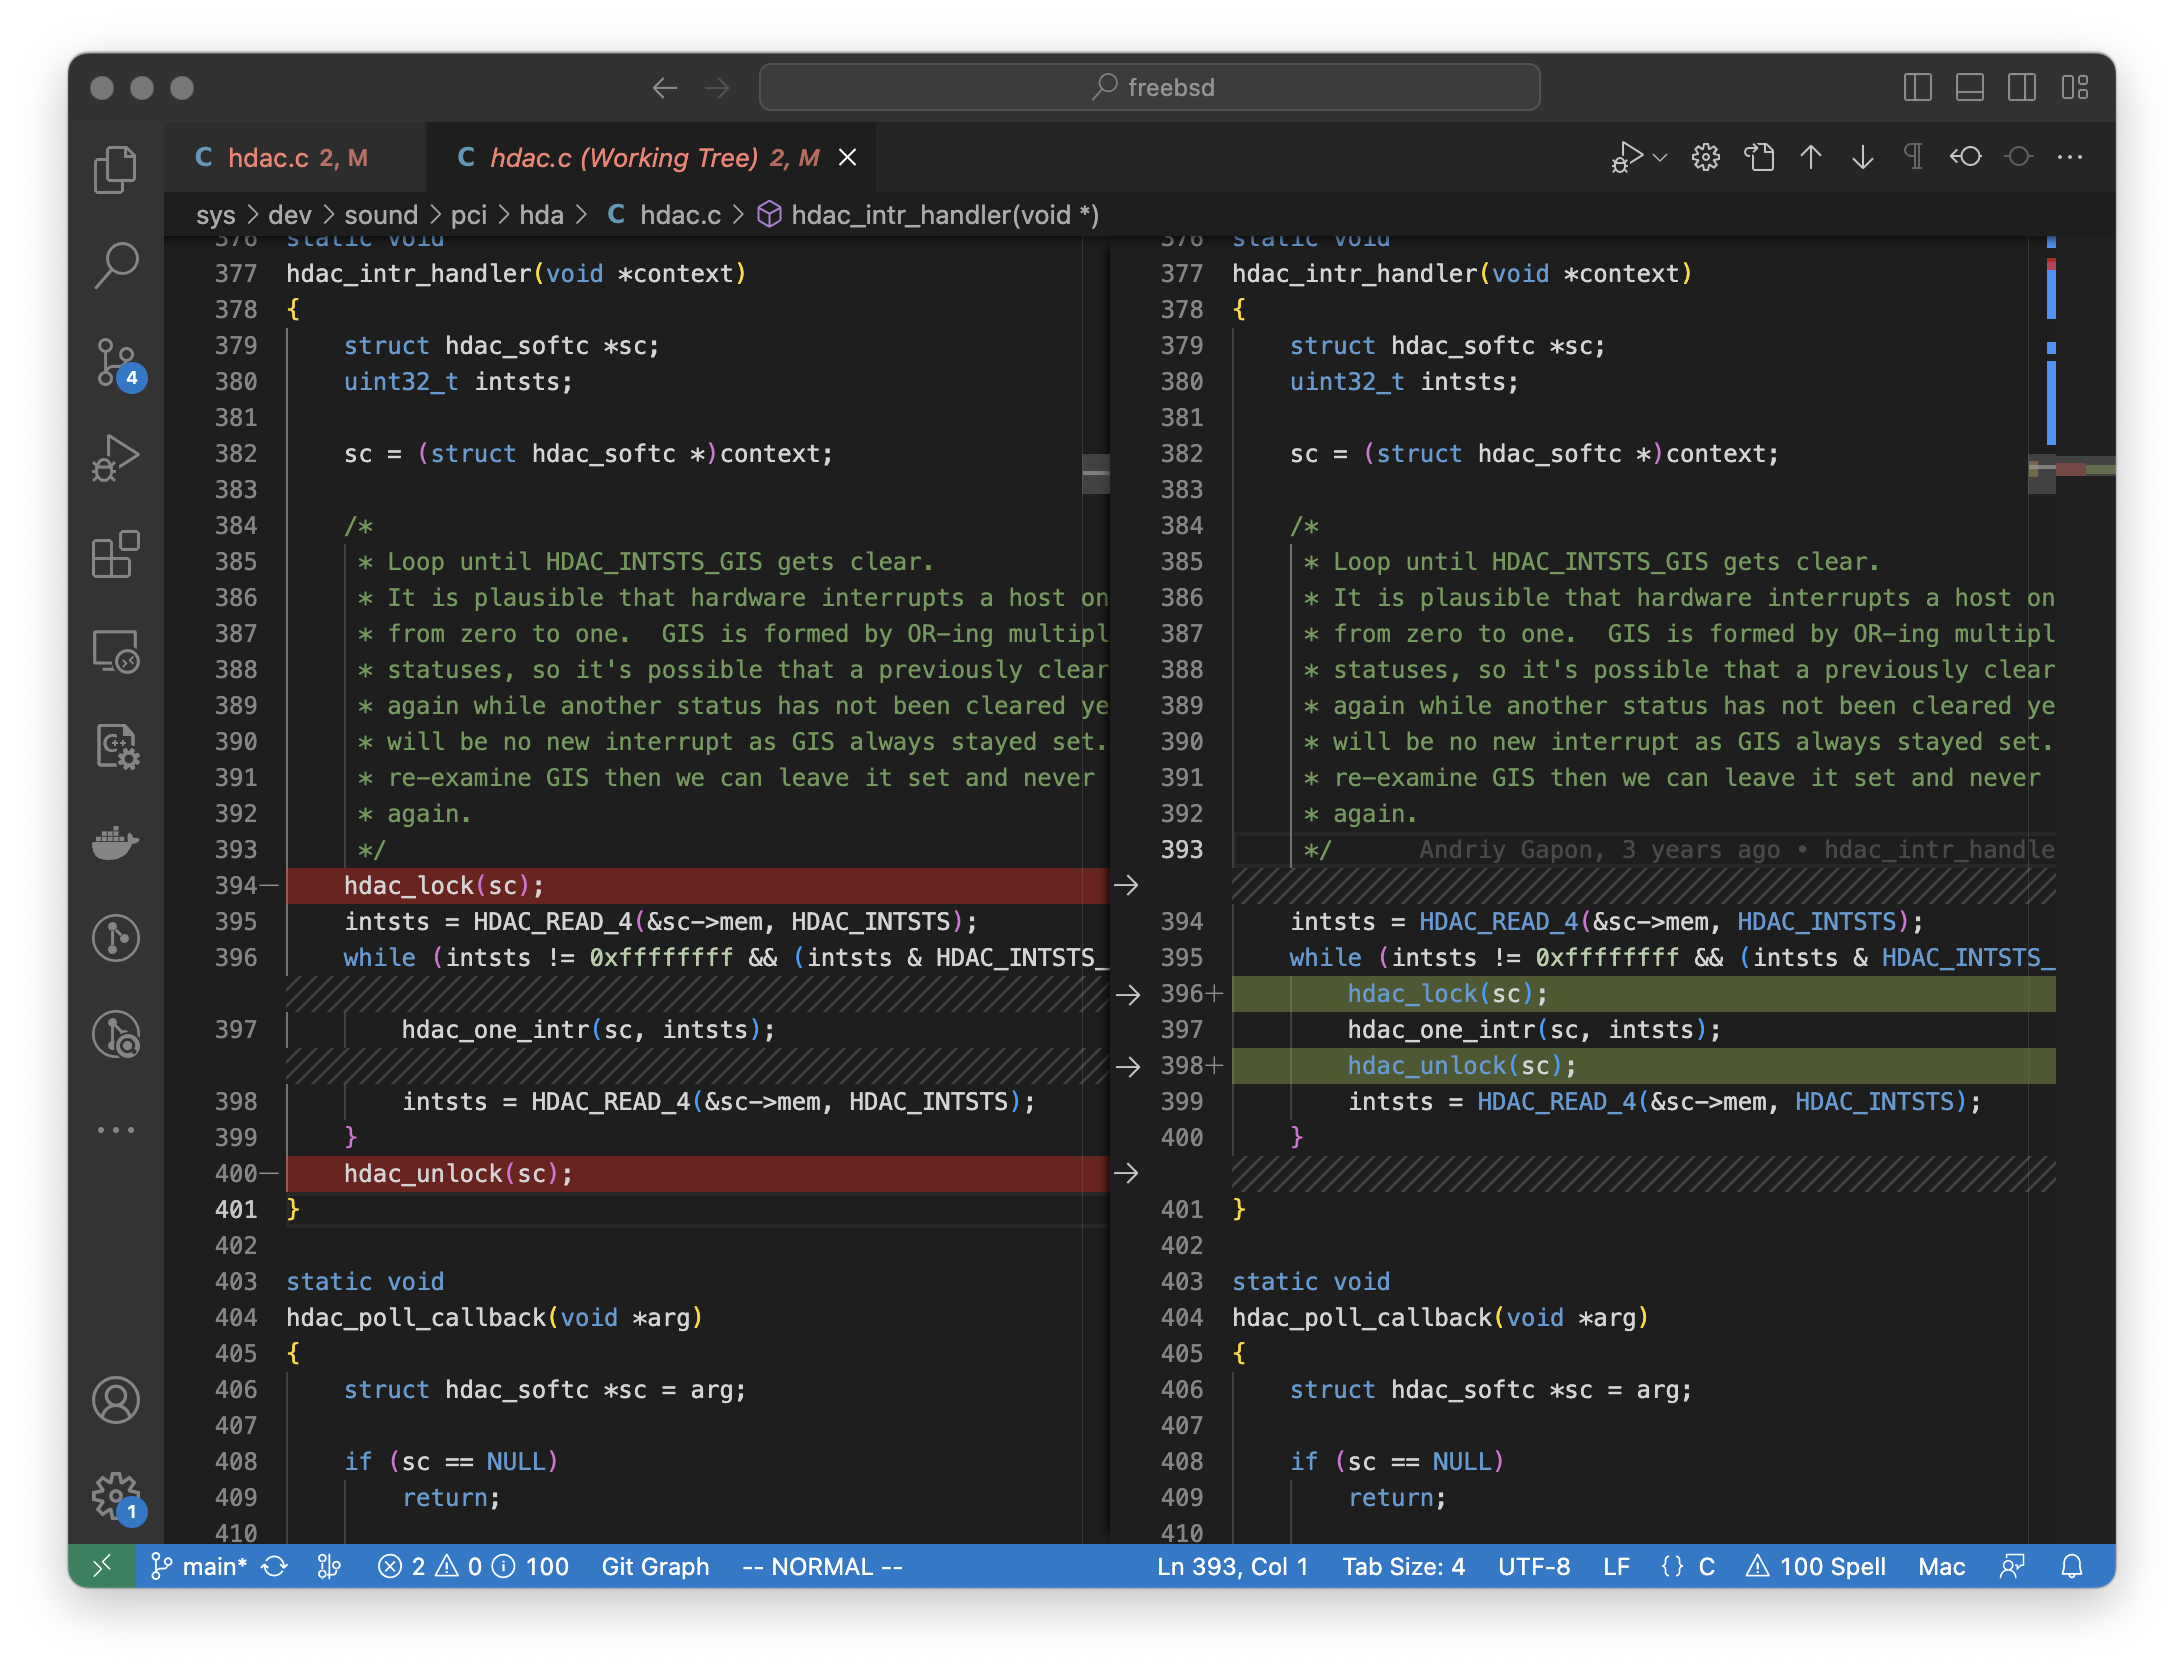 Editing FreeBSD in VS Code